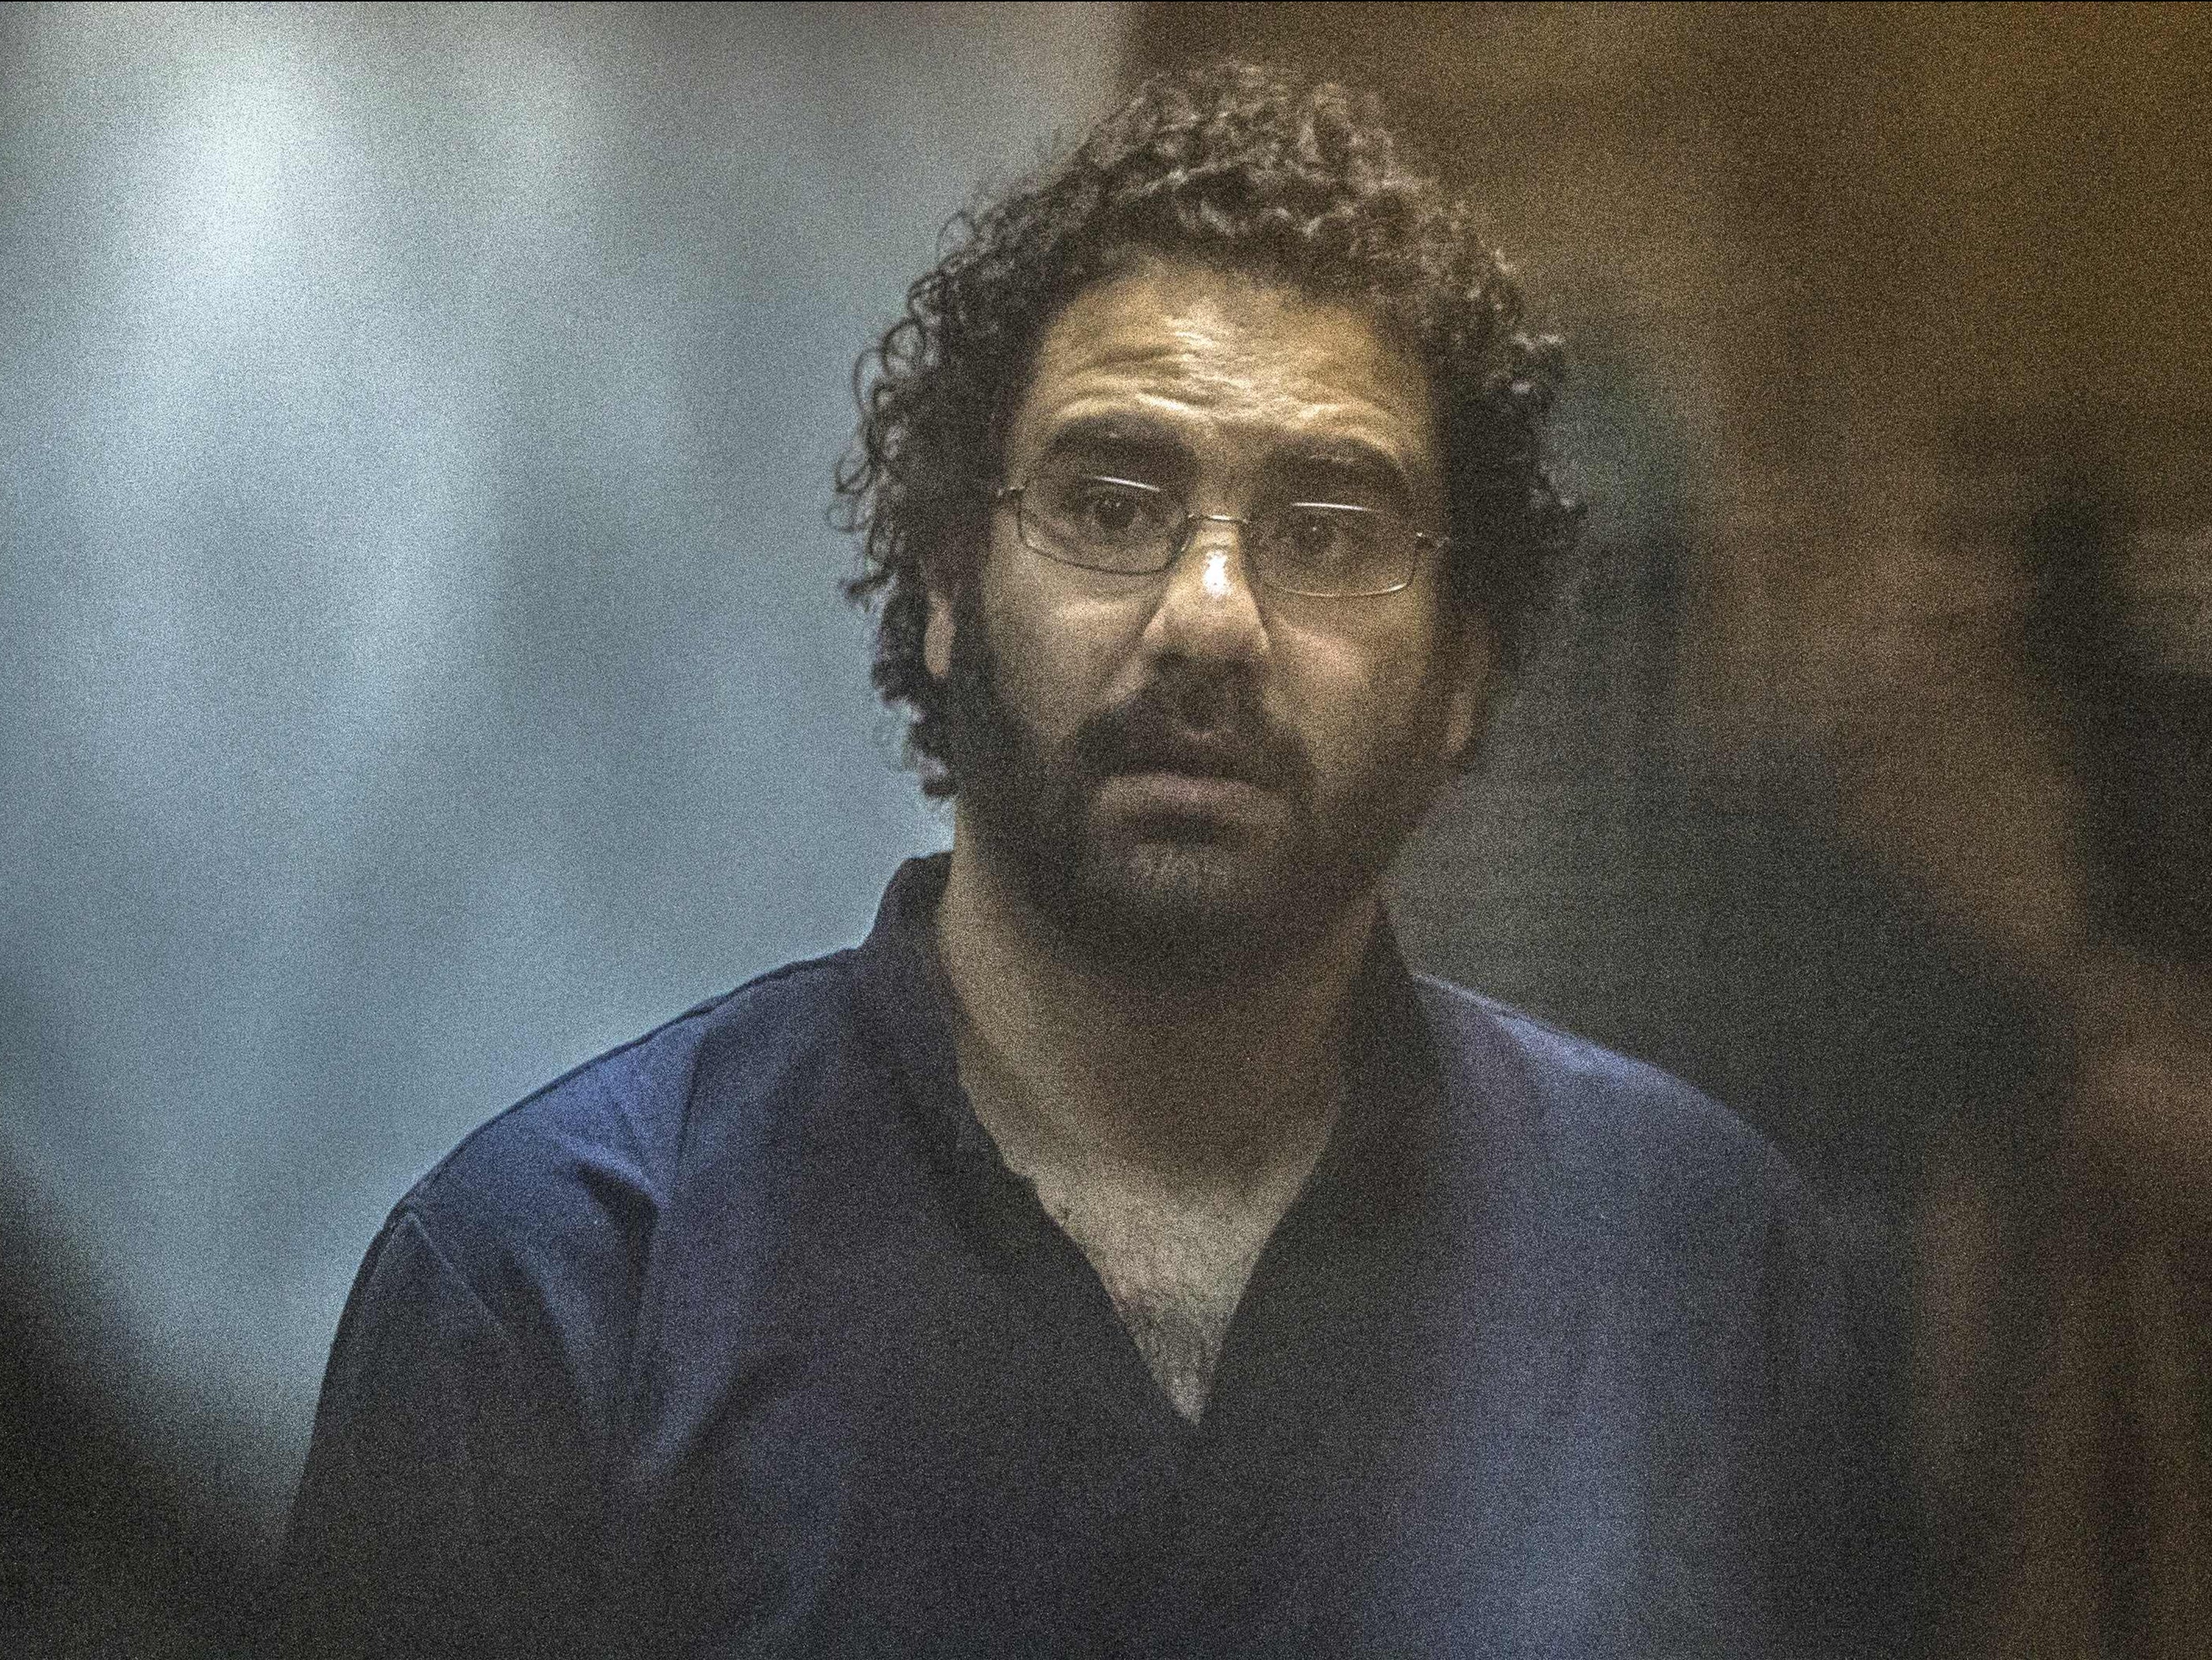 British-Egyptian activist and blogger Alaa Abdel Fattah pictured during a 2015 trial